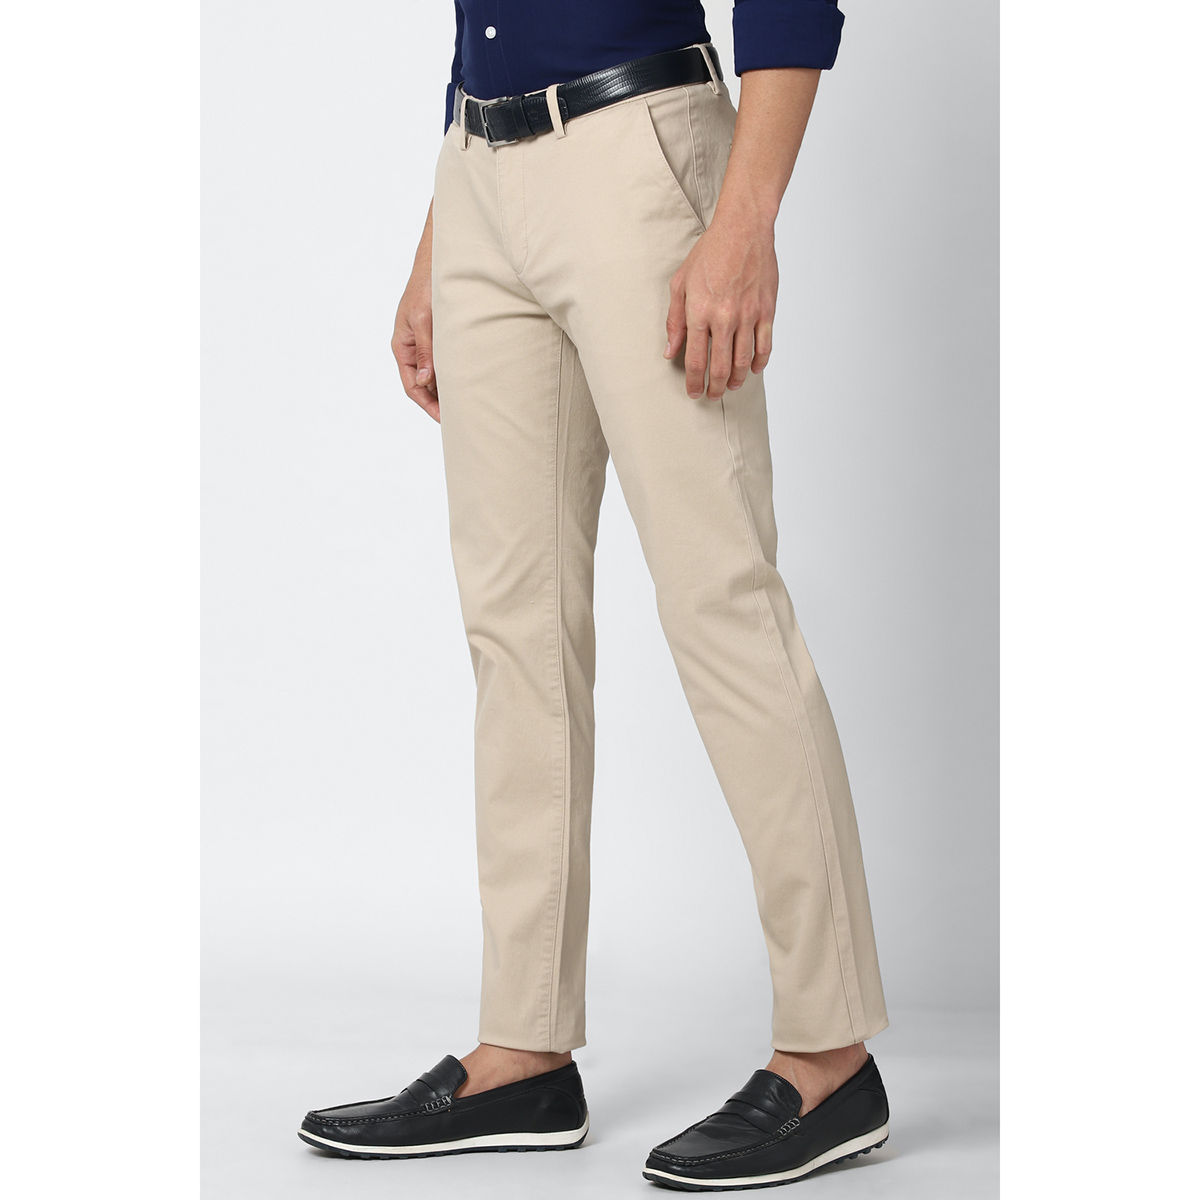 Buy Men Navy Solid Carrot Fit Casual Trousers Online - 782360 | Peter  England